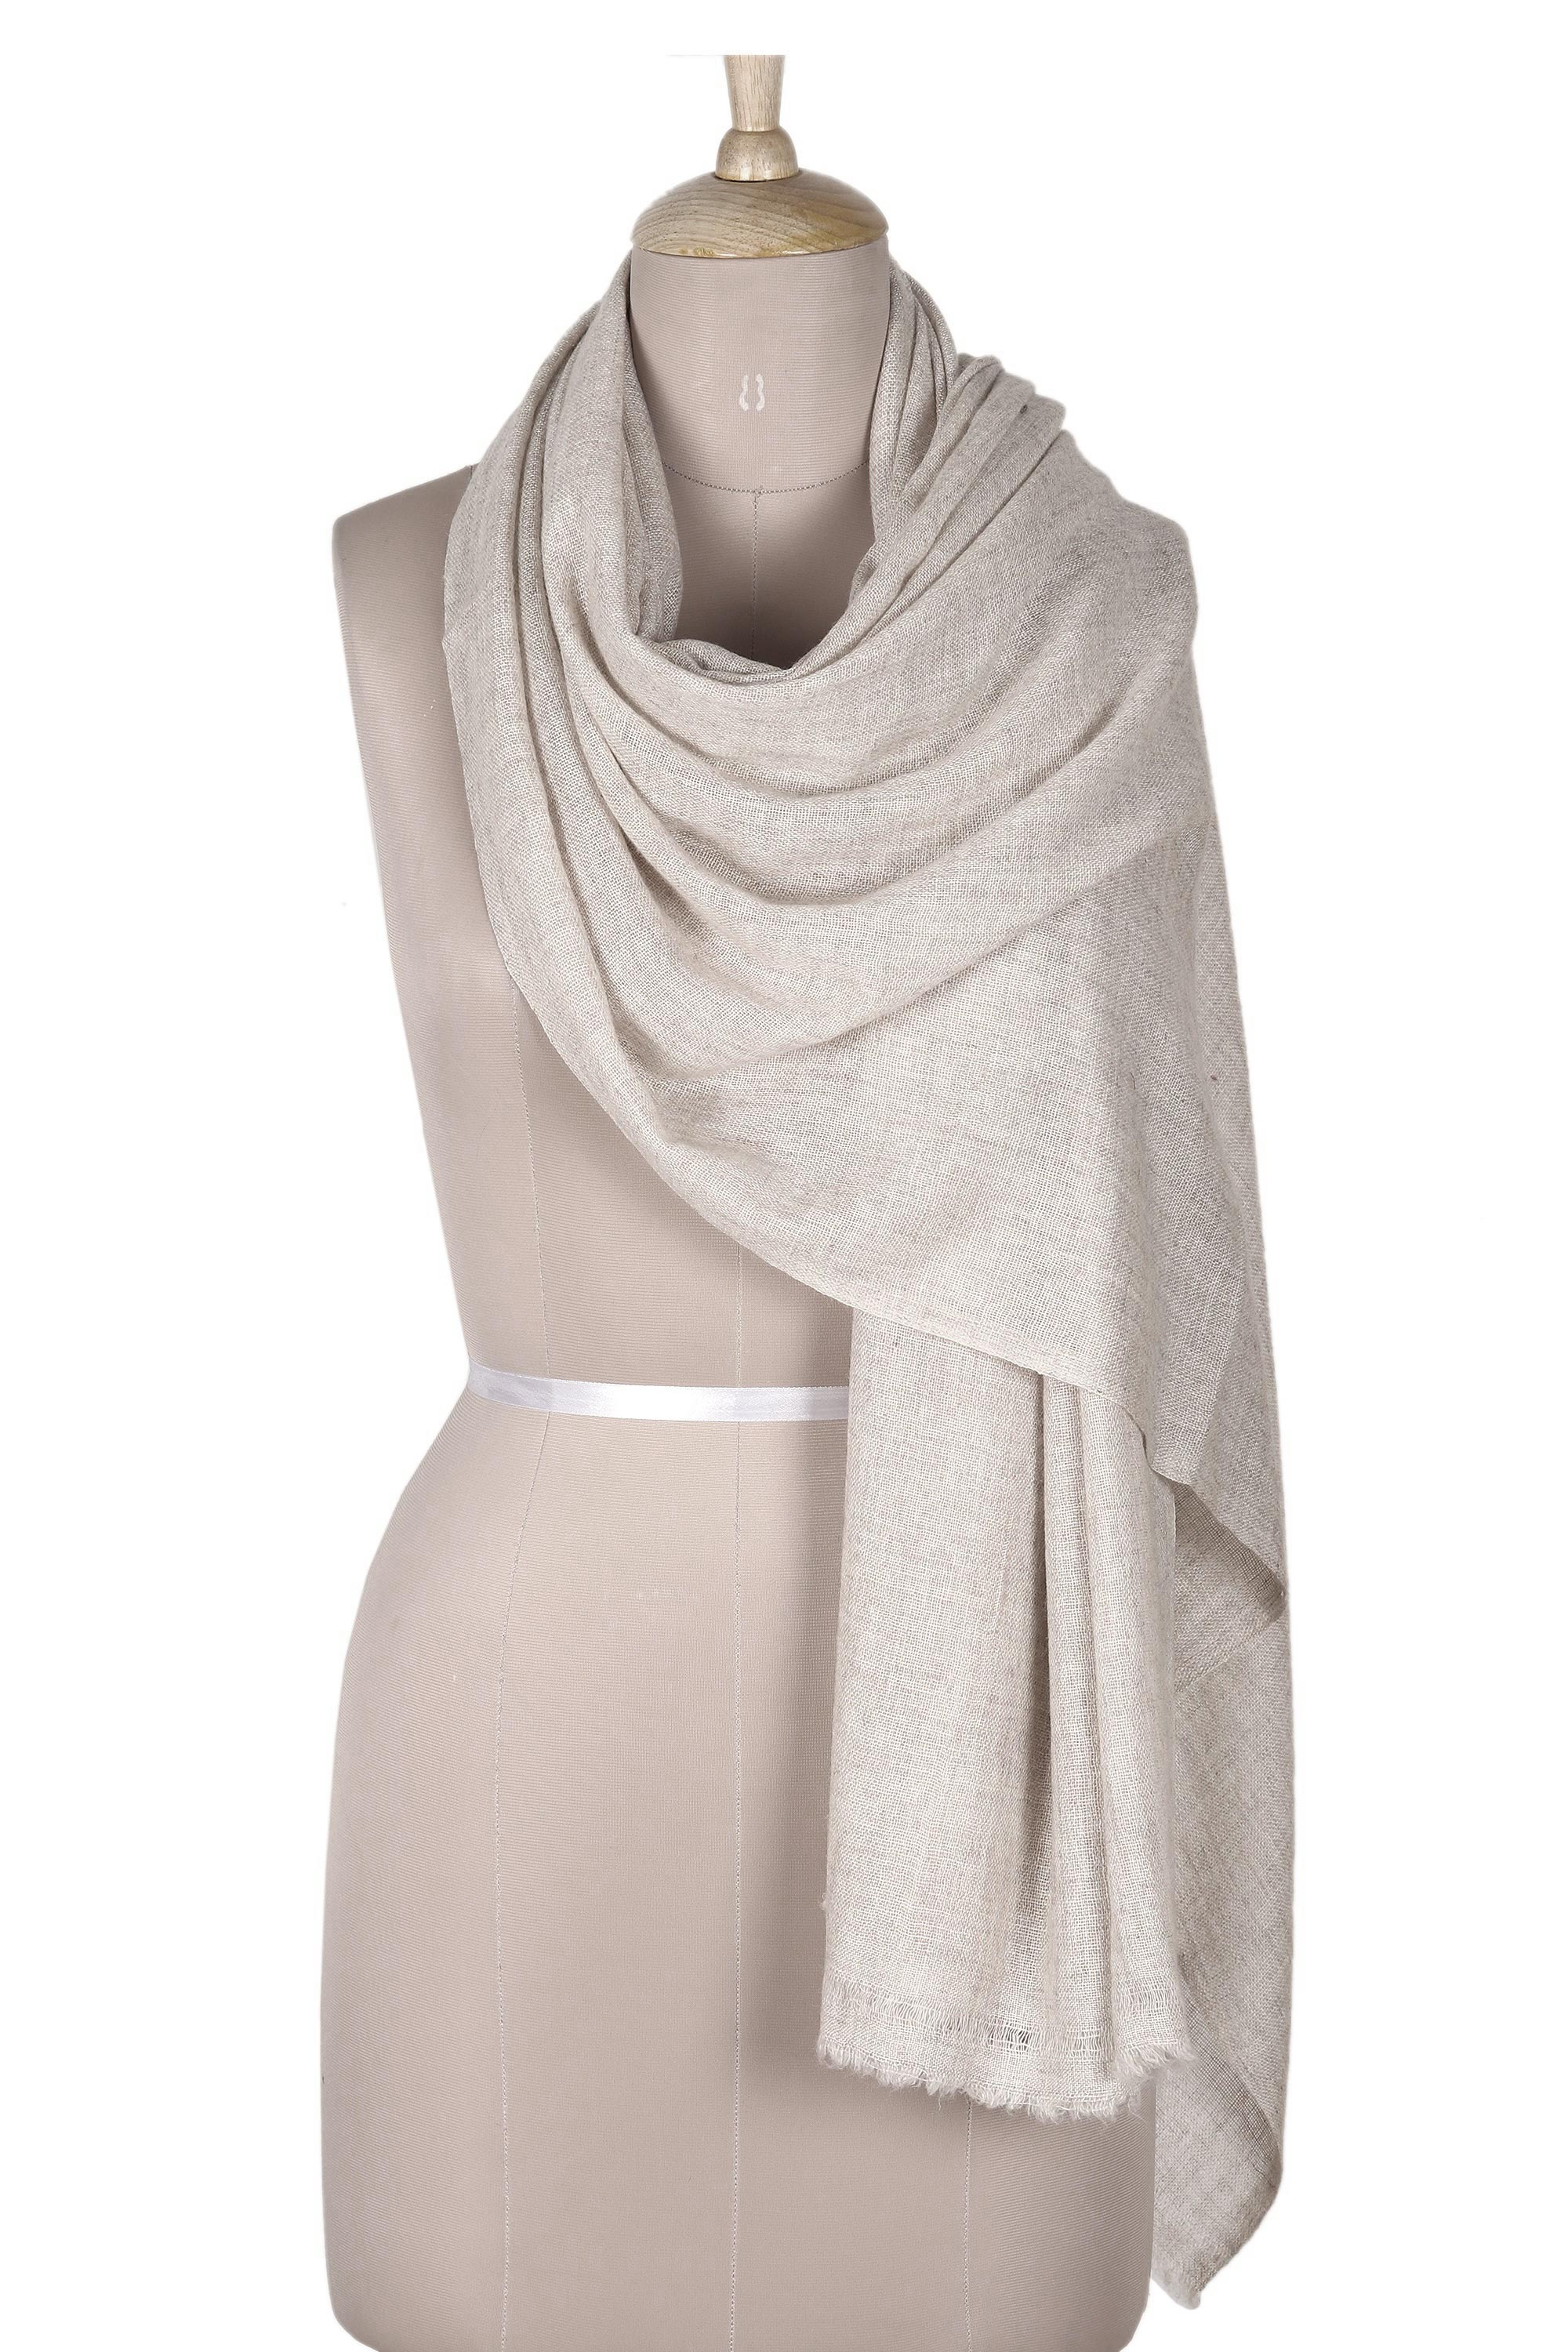 Soft Indian Cashmere Wool Woven Ivory Shawl - Alabaster Allure | NOVICA